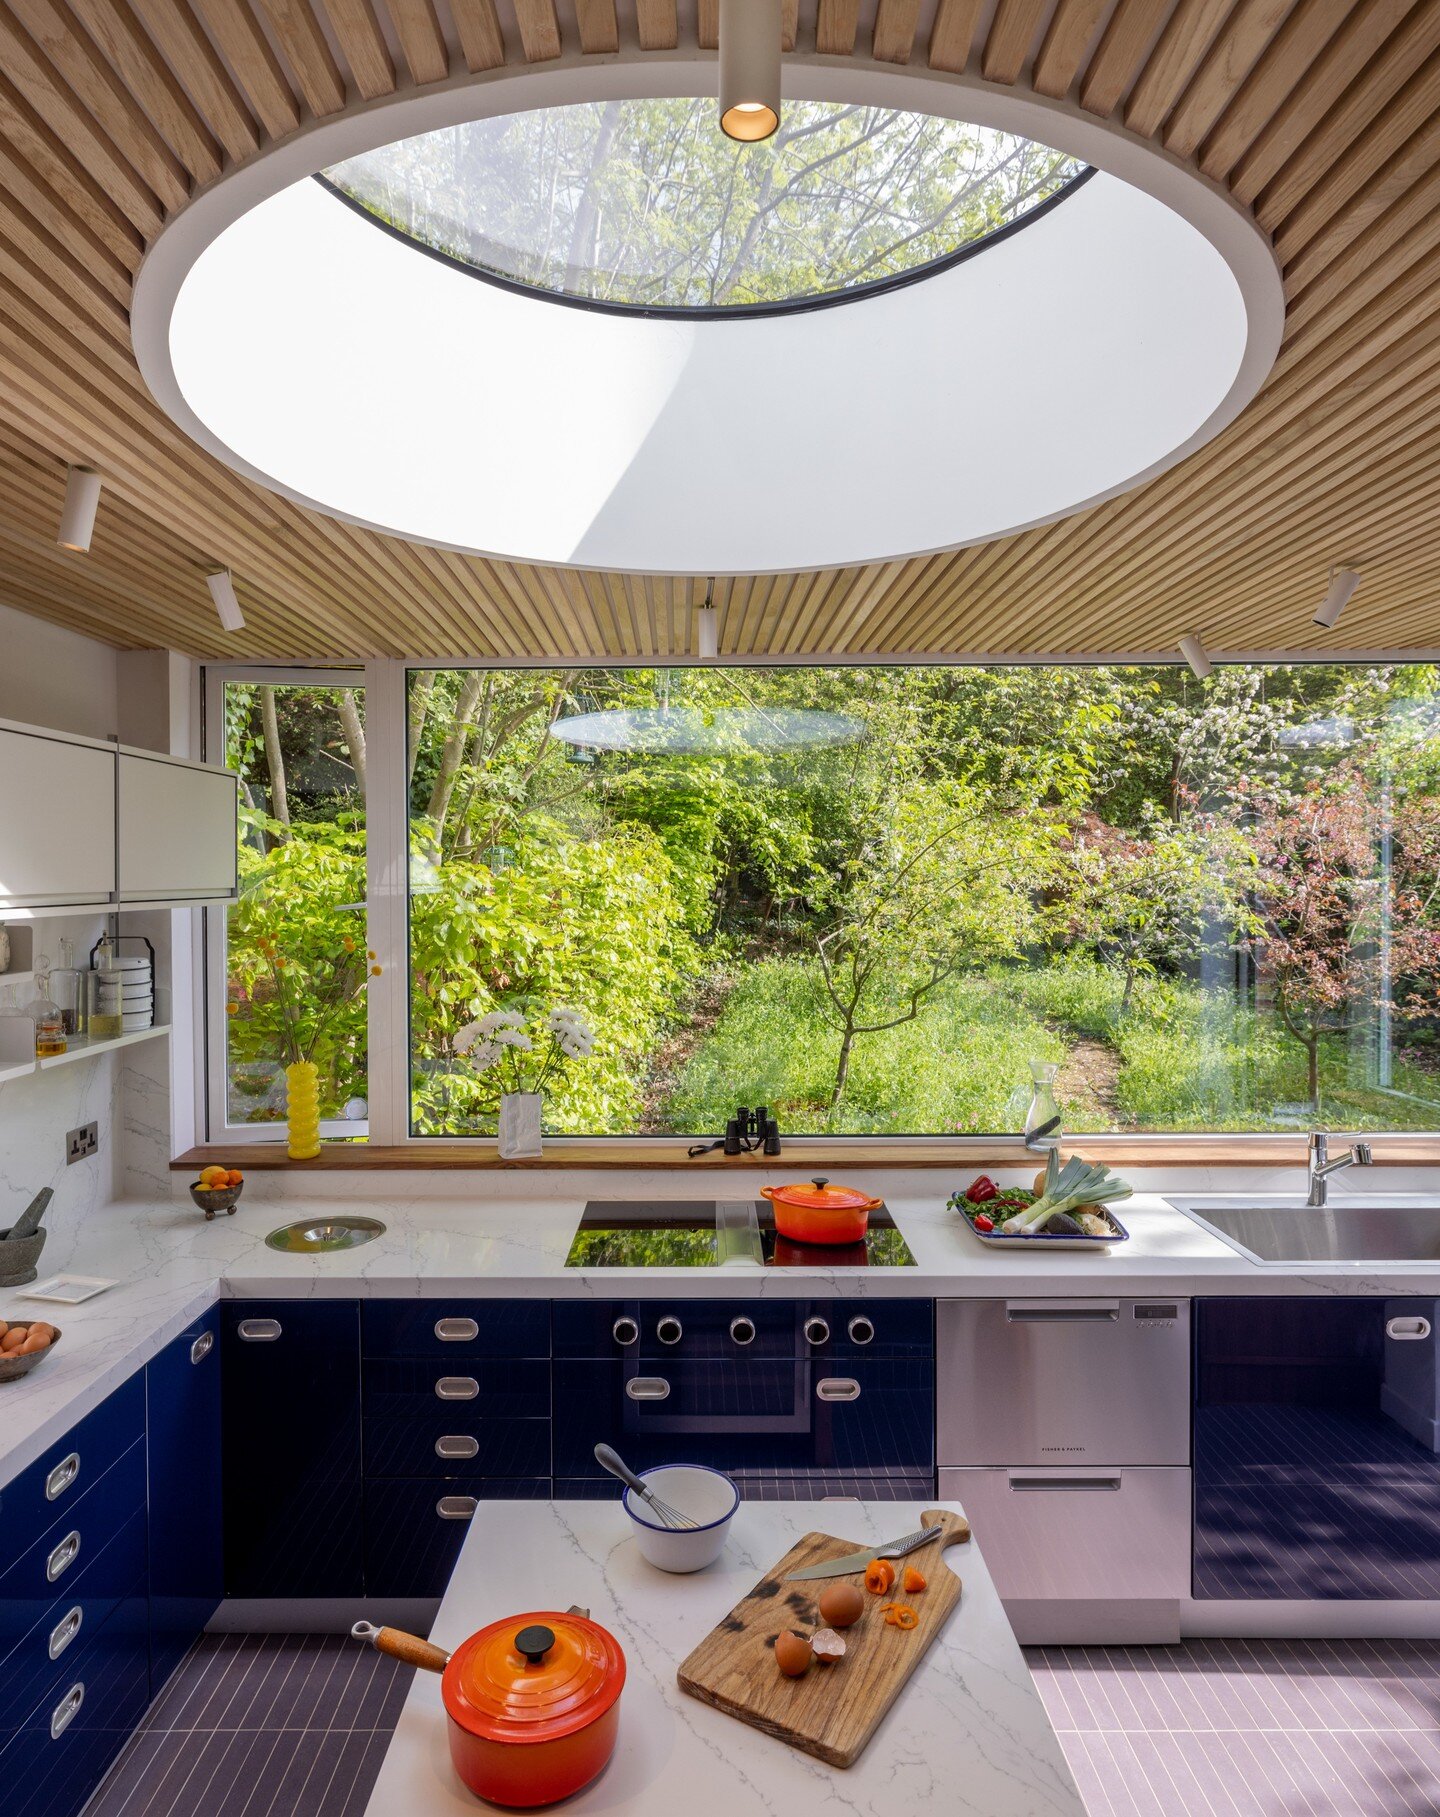 Kitchen in the Woods won a @dont.move.improve award this week.

Very well done @a_small_studio for a beautiful and sensitive design.

Link in bio for the link to article, check out our website for further images of the garden.

#DMI2023 #winners #gre